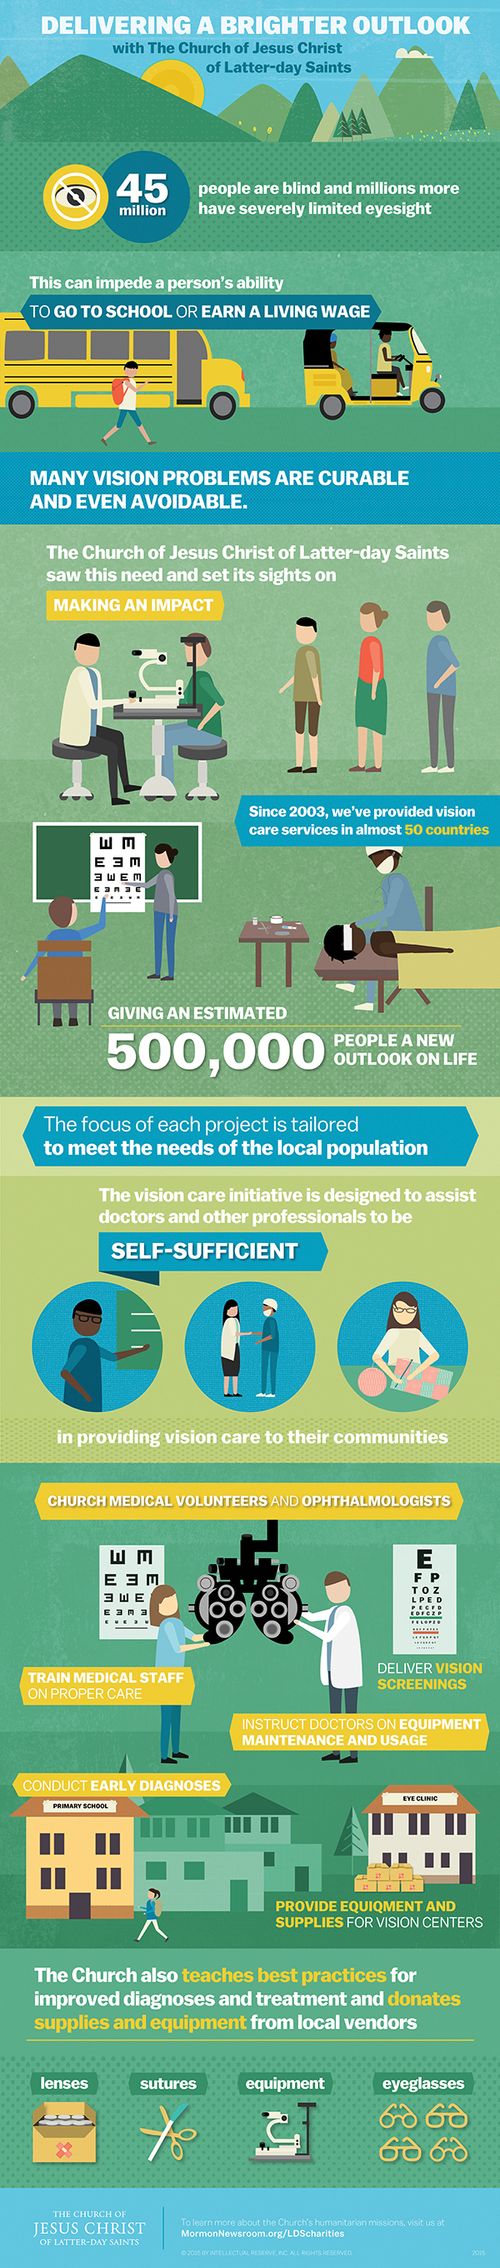 An infographic describing the Church of Jesus Christ of Latter-day Saints's vision care services. Learn more at mormonnewsroom.org.